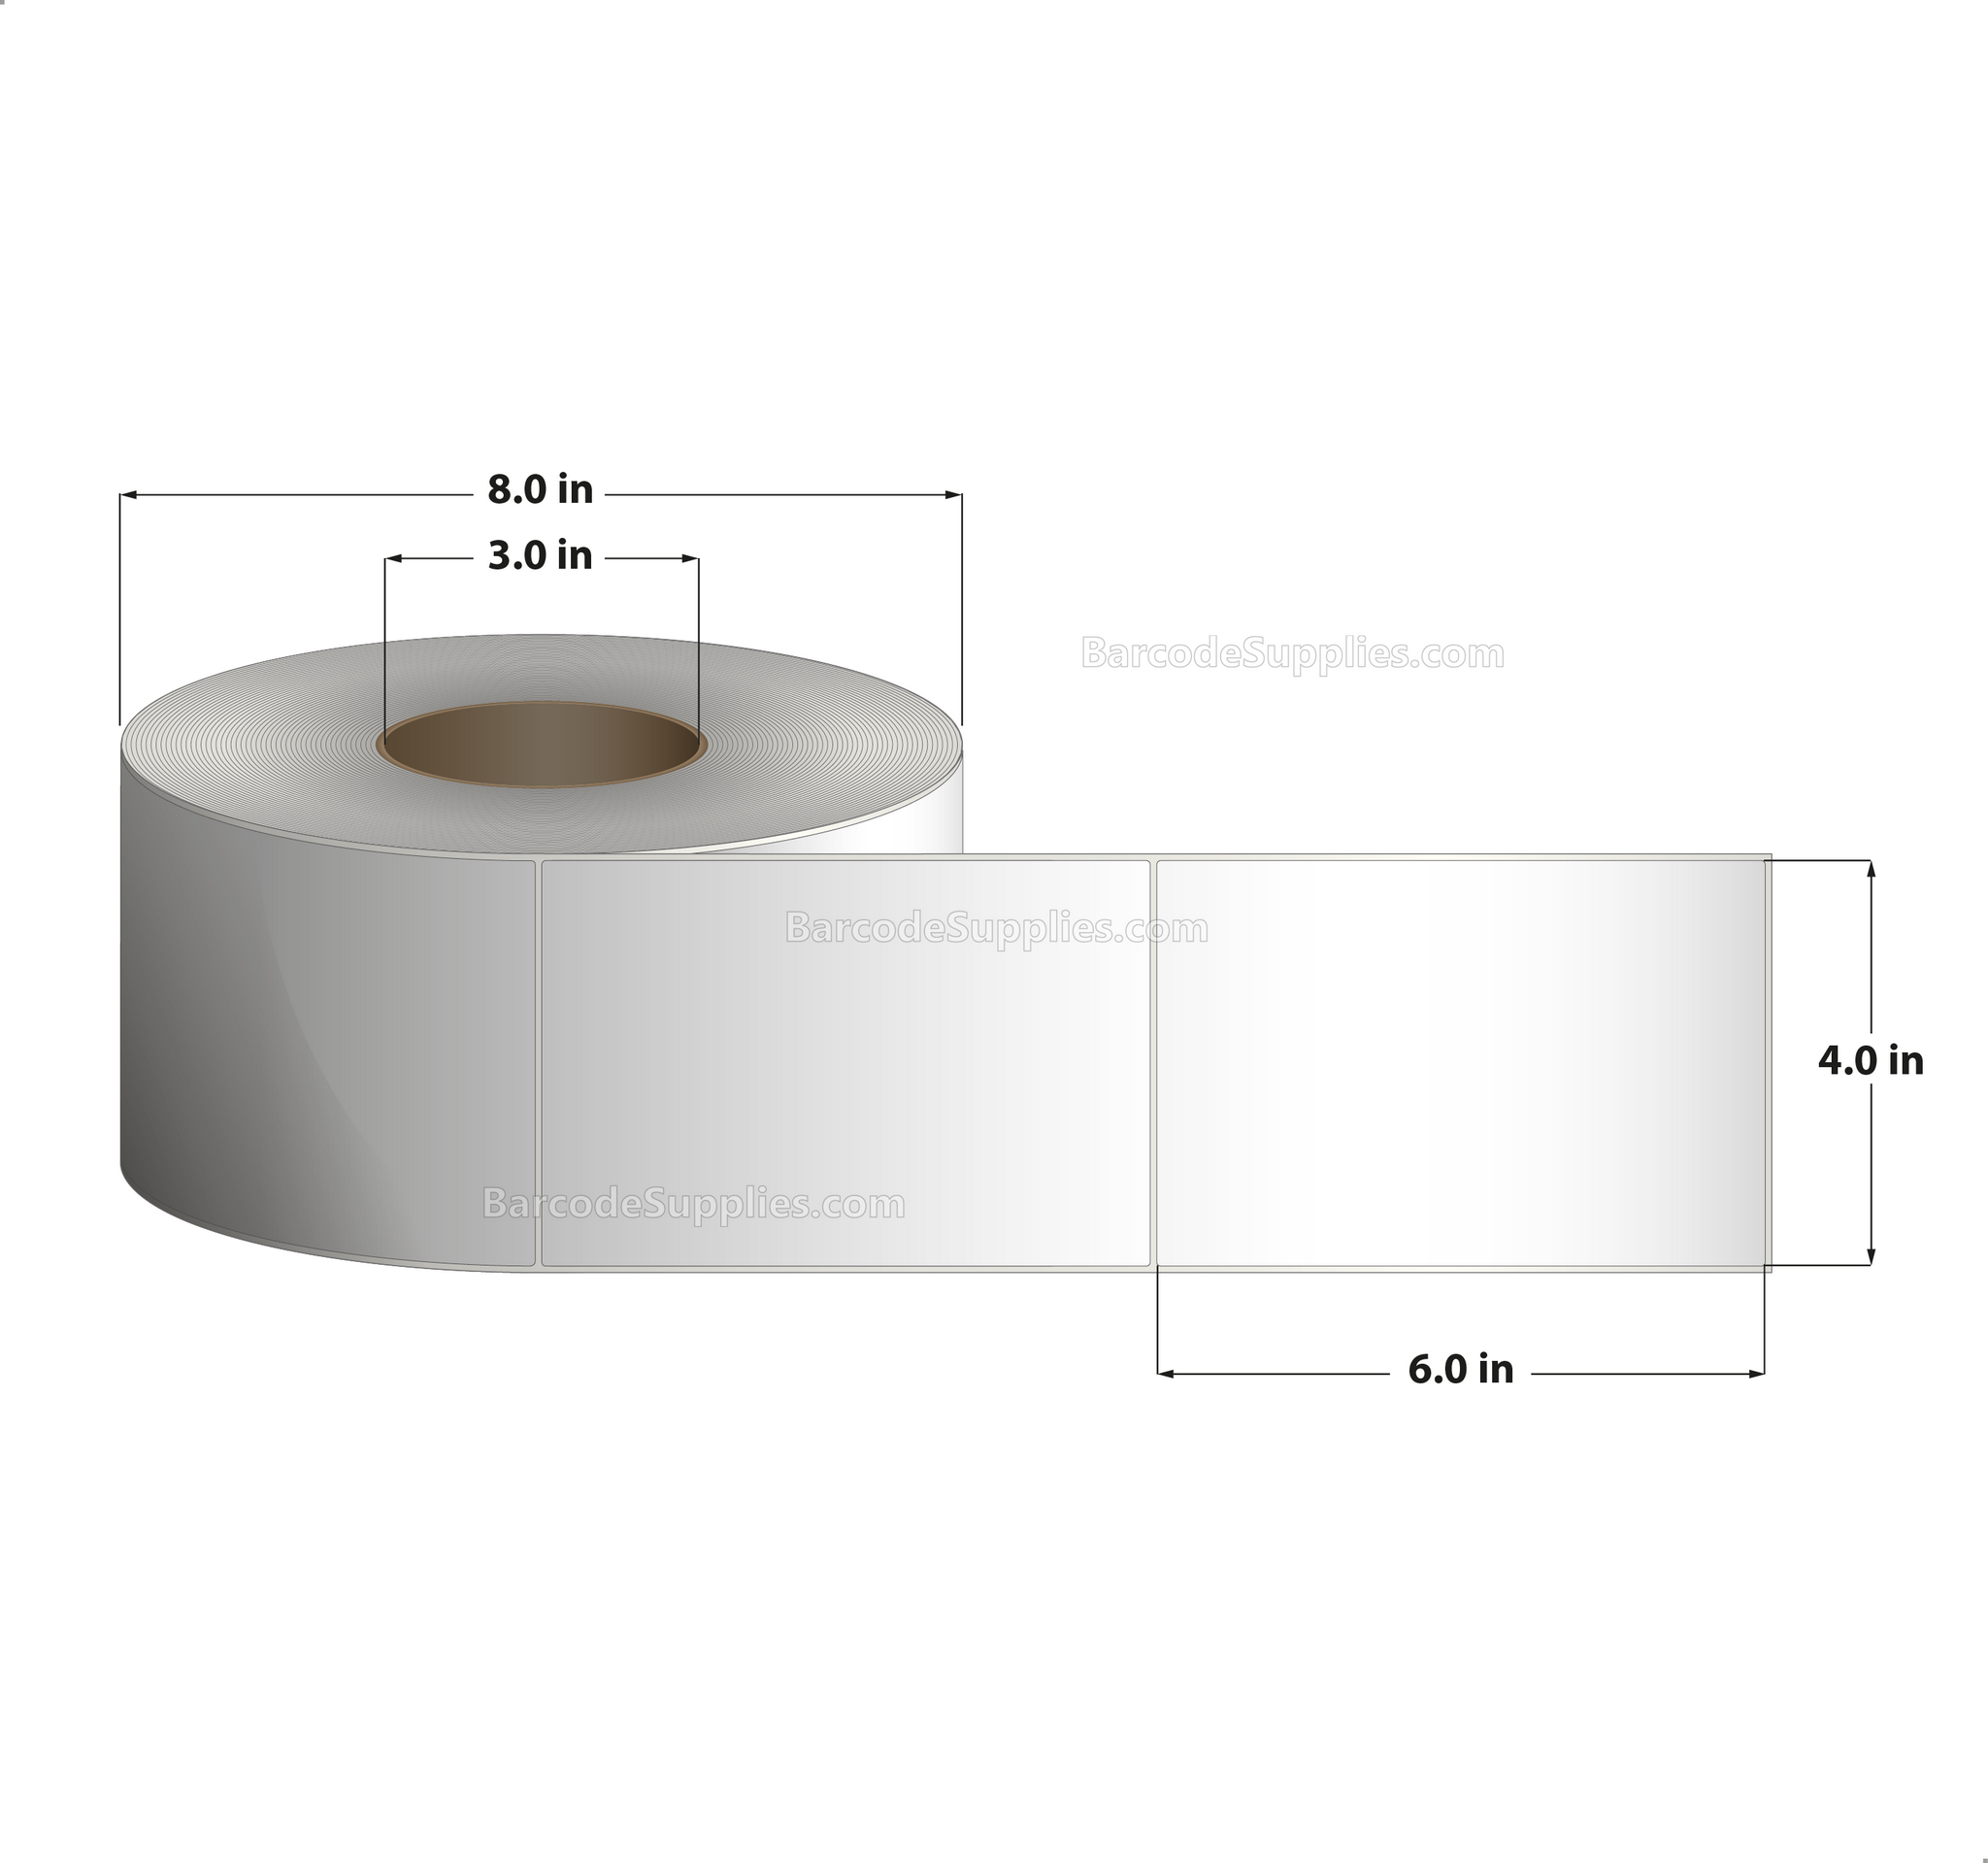 4 x 6 Thermal Transfer White Labels With Permanent Adhesive - No Perforation - 1000 Labels Per Roll - Carton Of 4 Rolls - 4000 Labels Total - MPN: RT-4-6-1000-NP